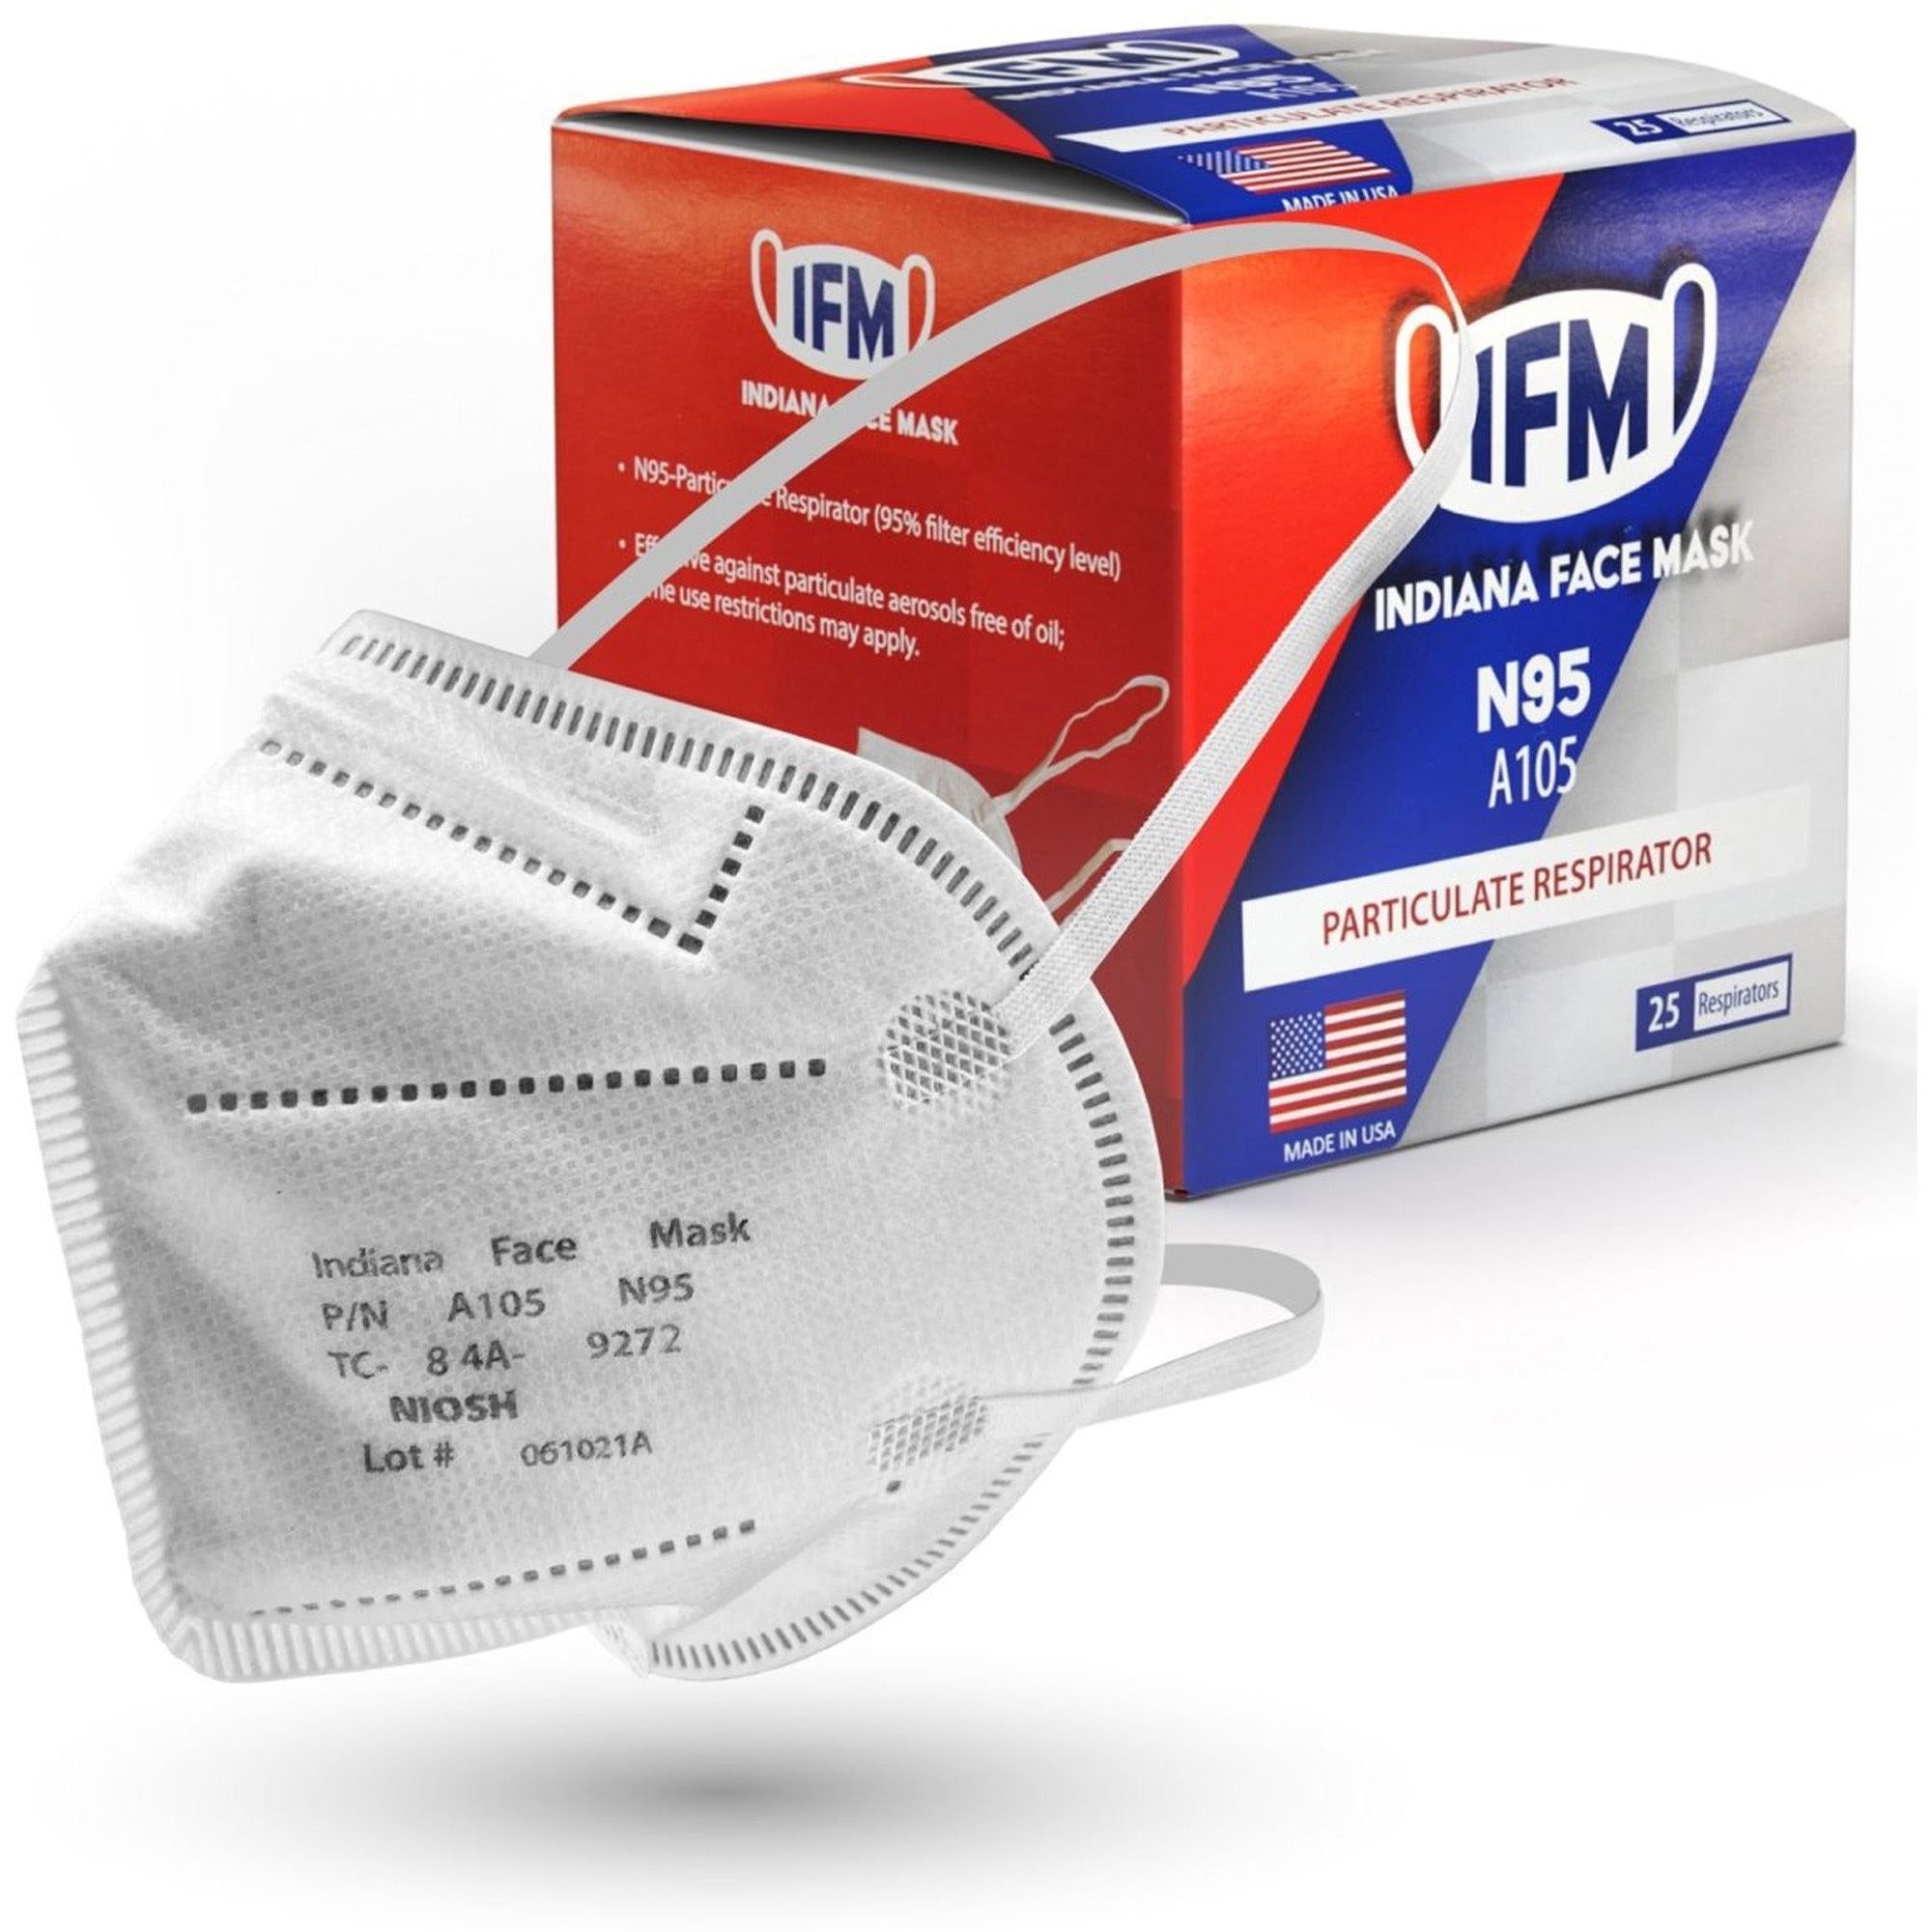 ifm-v3gate-indiana-face-mask-n95-respirators-recommended-for-face-airborne-particle-protection-polyethylene-non-woven-polypropylene-red-5-layered-adjustable-nose-clip-25-box_vgav3a105 - 1